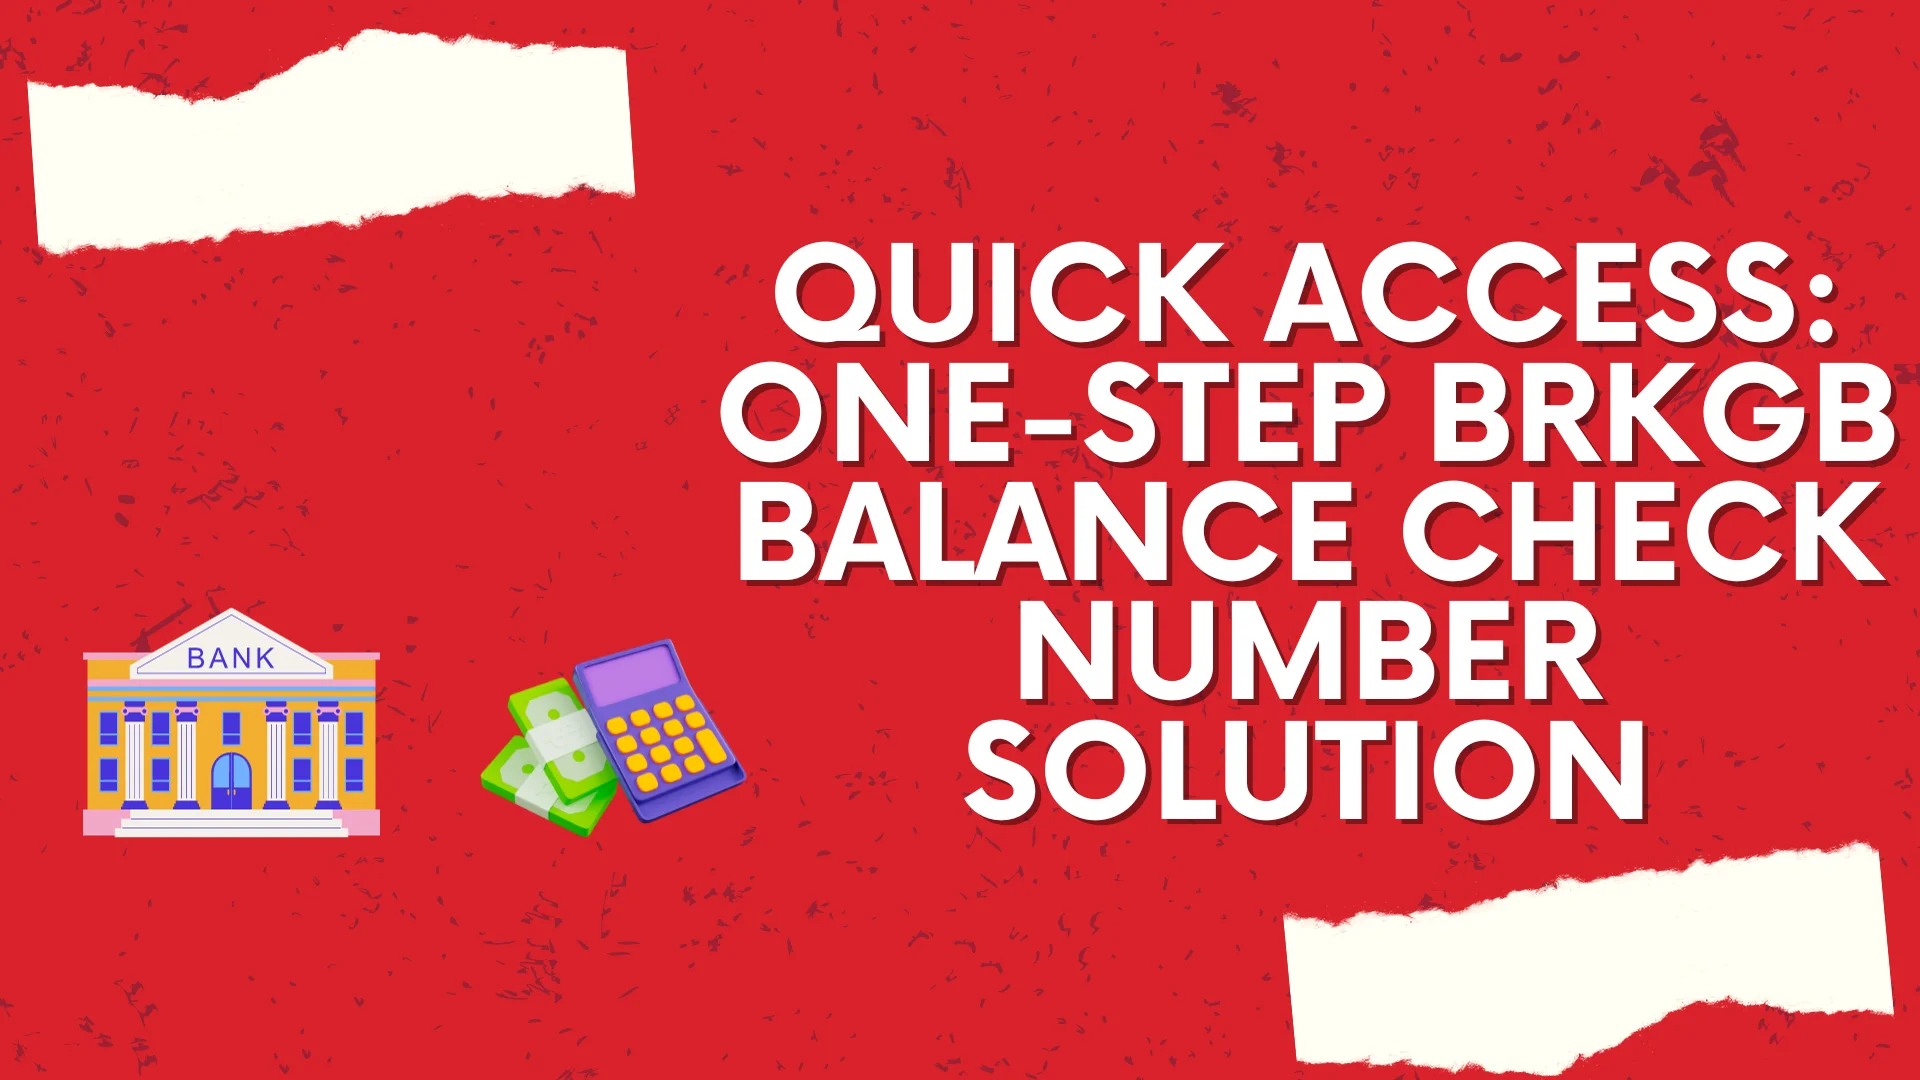 Graphic with a BRKGB bank building, cash, and a check balance through mobile against a red textured background.